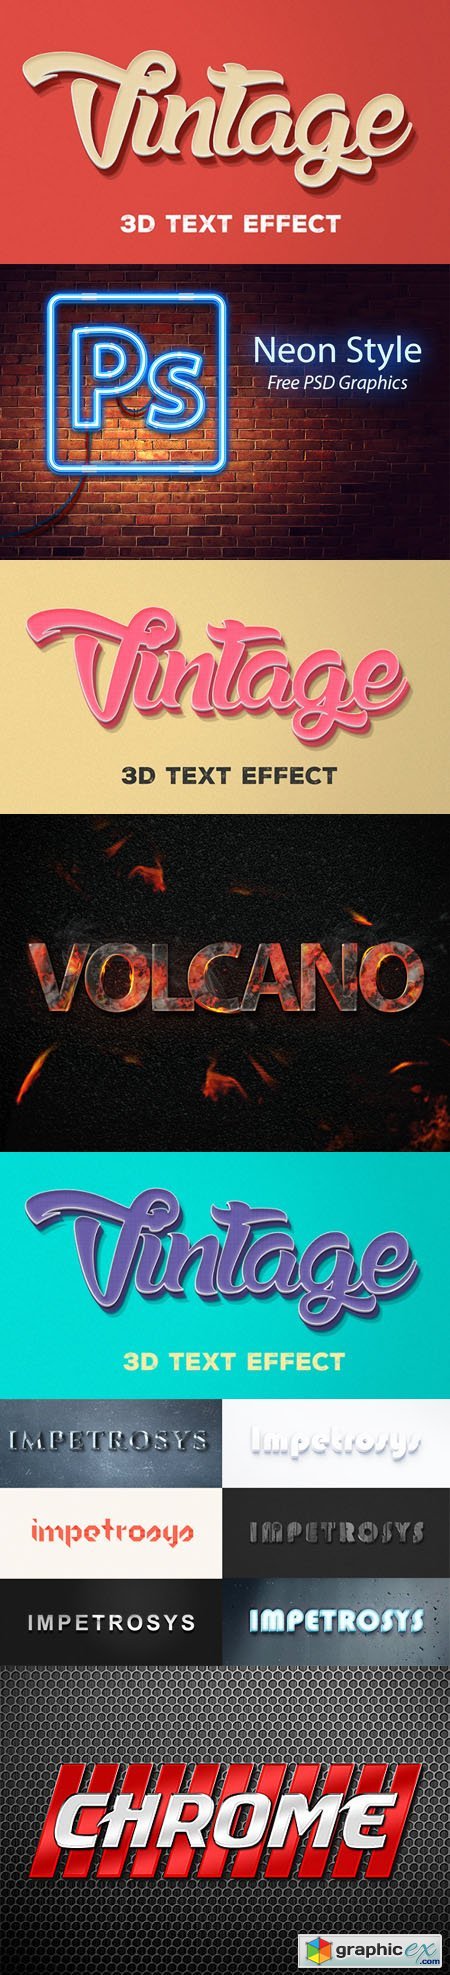 Photoshop Text Effects - Neon, 3D Vintage, Burning, Chrome and others